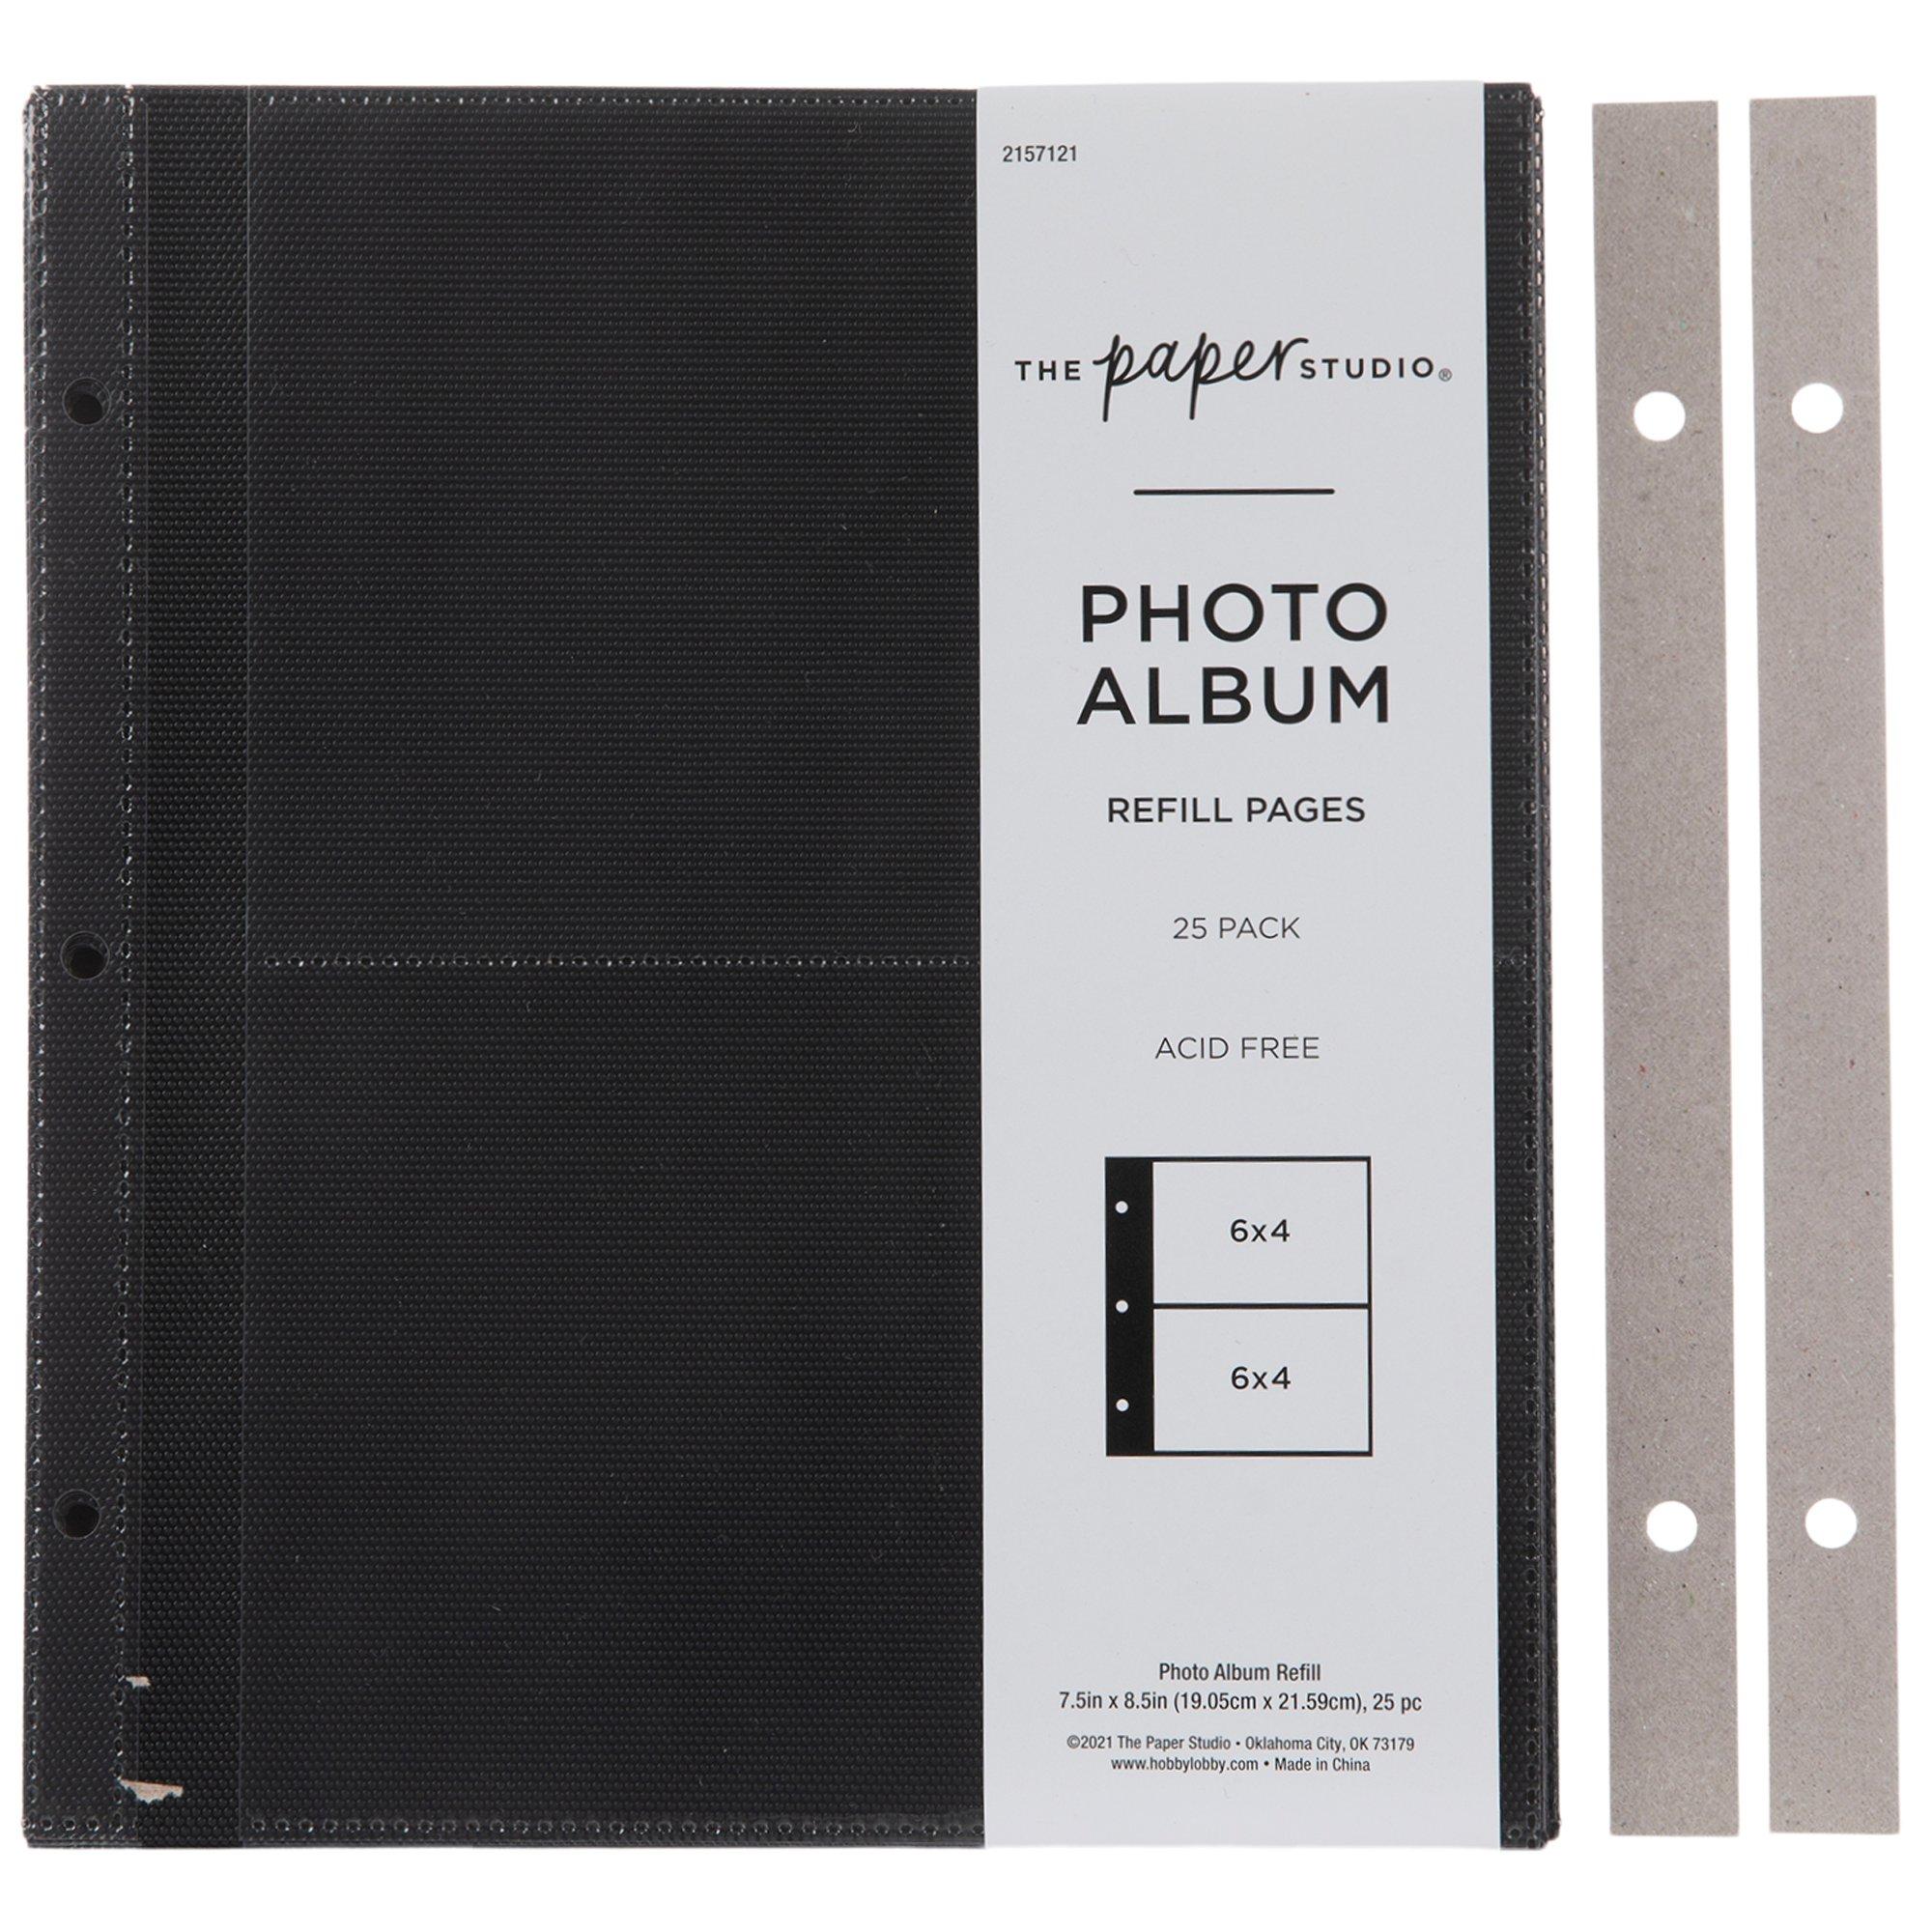 photo album refill pages